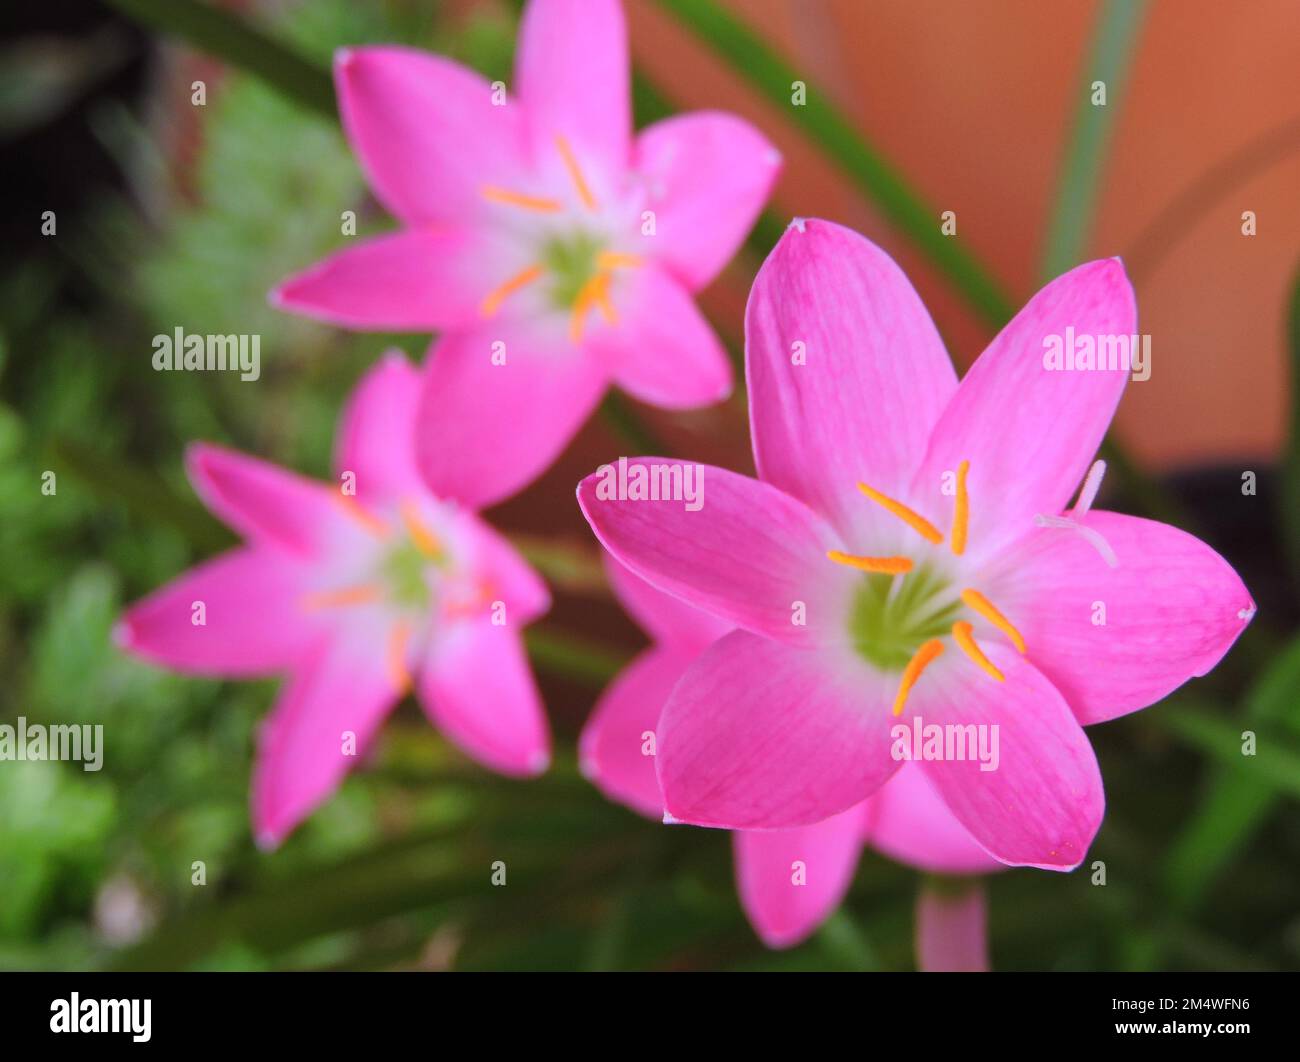 Zephyranthes rosea, commonly known as the Cuban zephyrlily, rosy rain lily, rose fairy lily, rose zephyr lily or the pink rain lily. Stock Photo